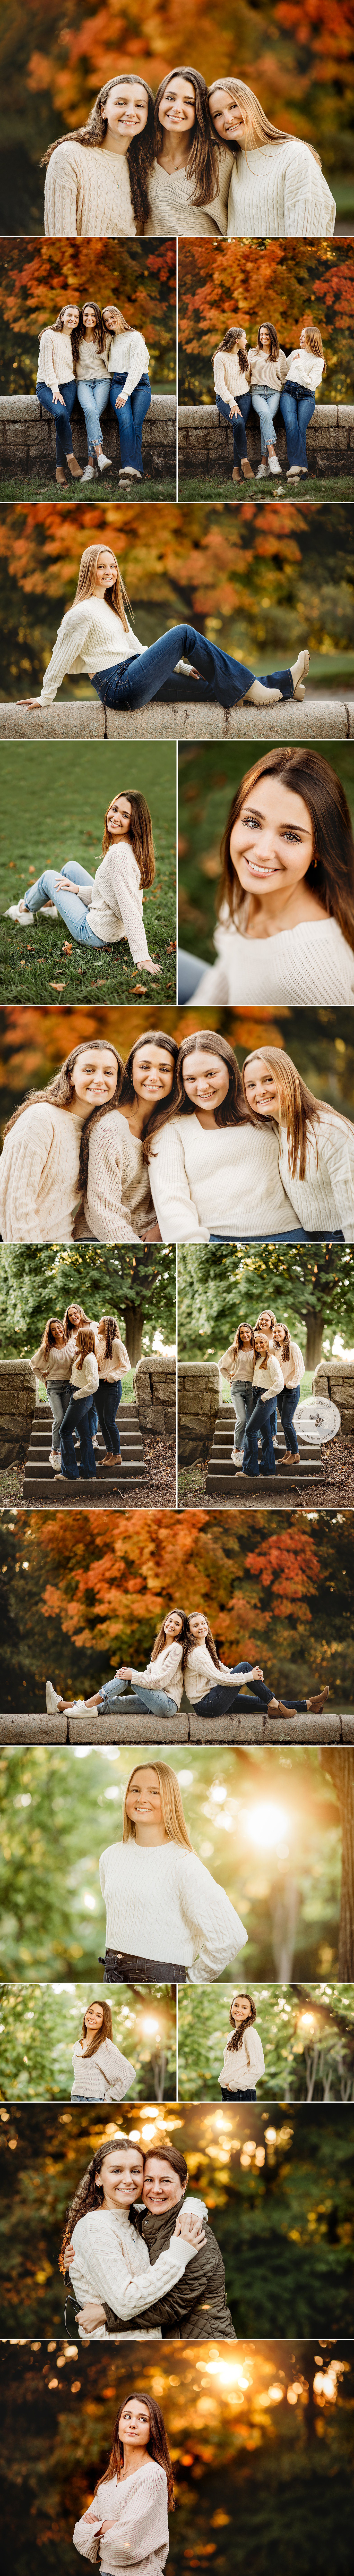 Larz Anderson Park senior session for four young women in white and cream sweaters in Brookline MA photographed by Boston senior portrait photographer Helena Goessens Photography